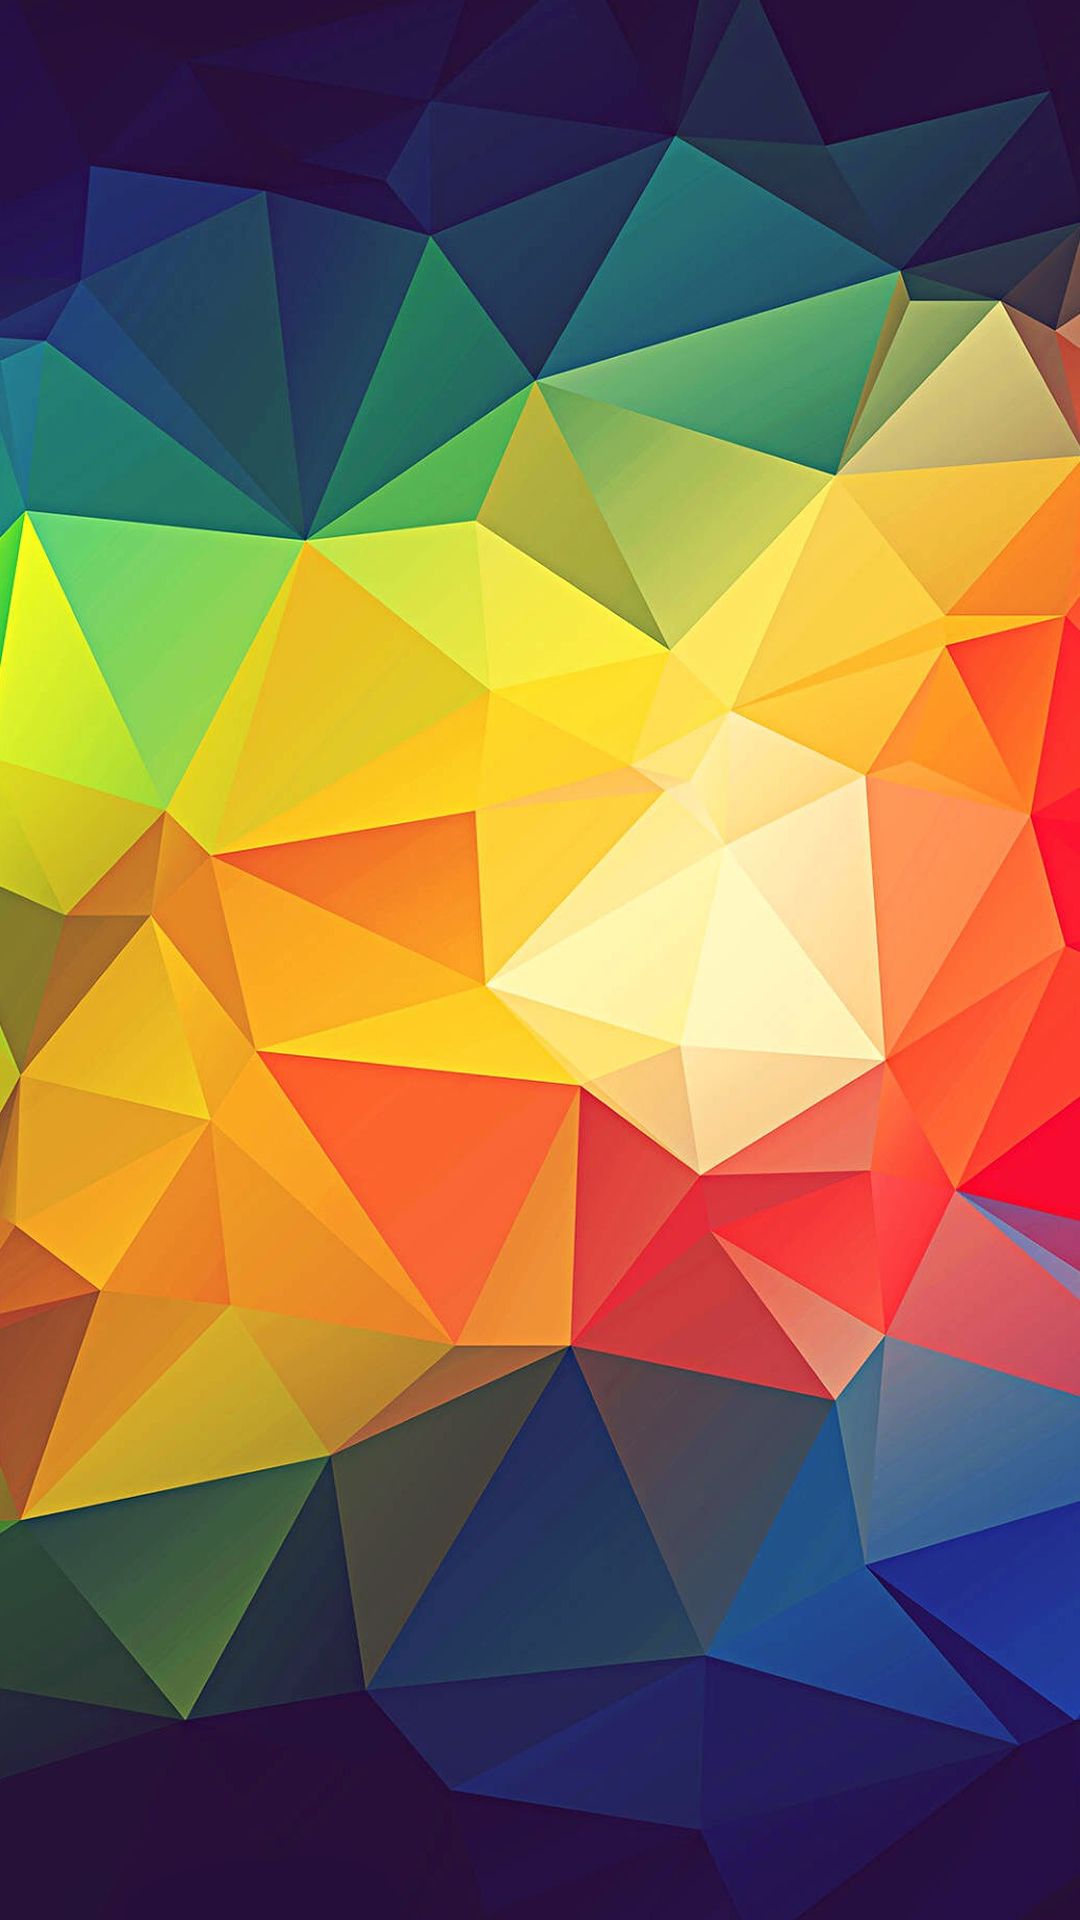 Colorful Abstract Triangle Shapes Render iPhone 8 Wallpaper Free Download